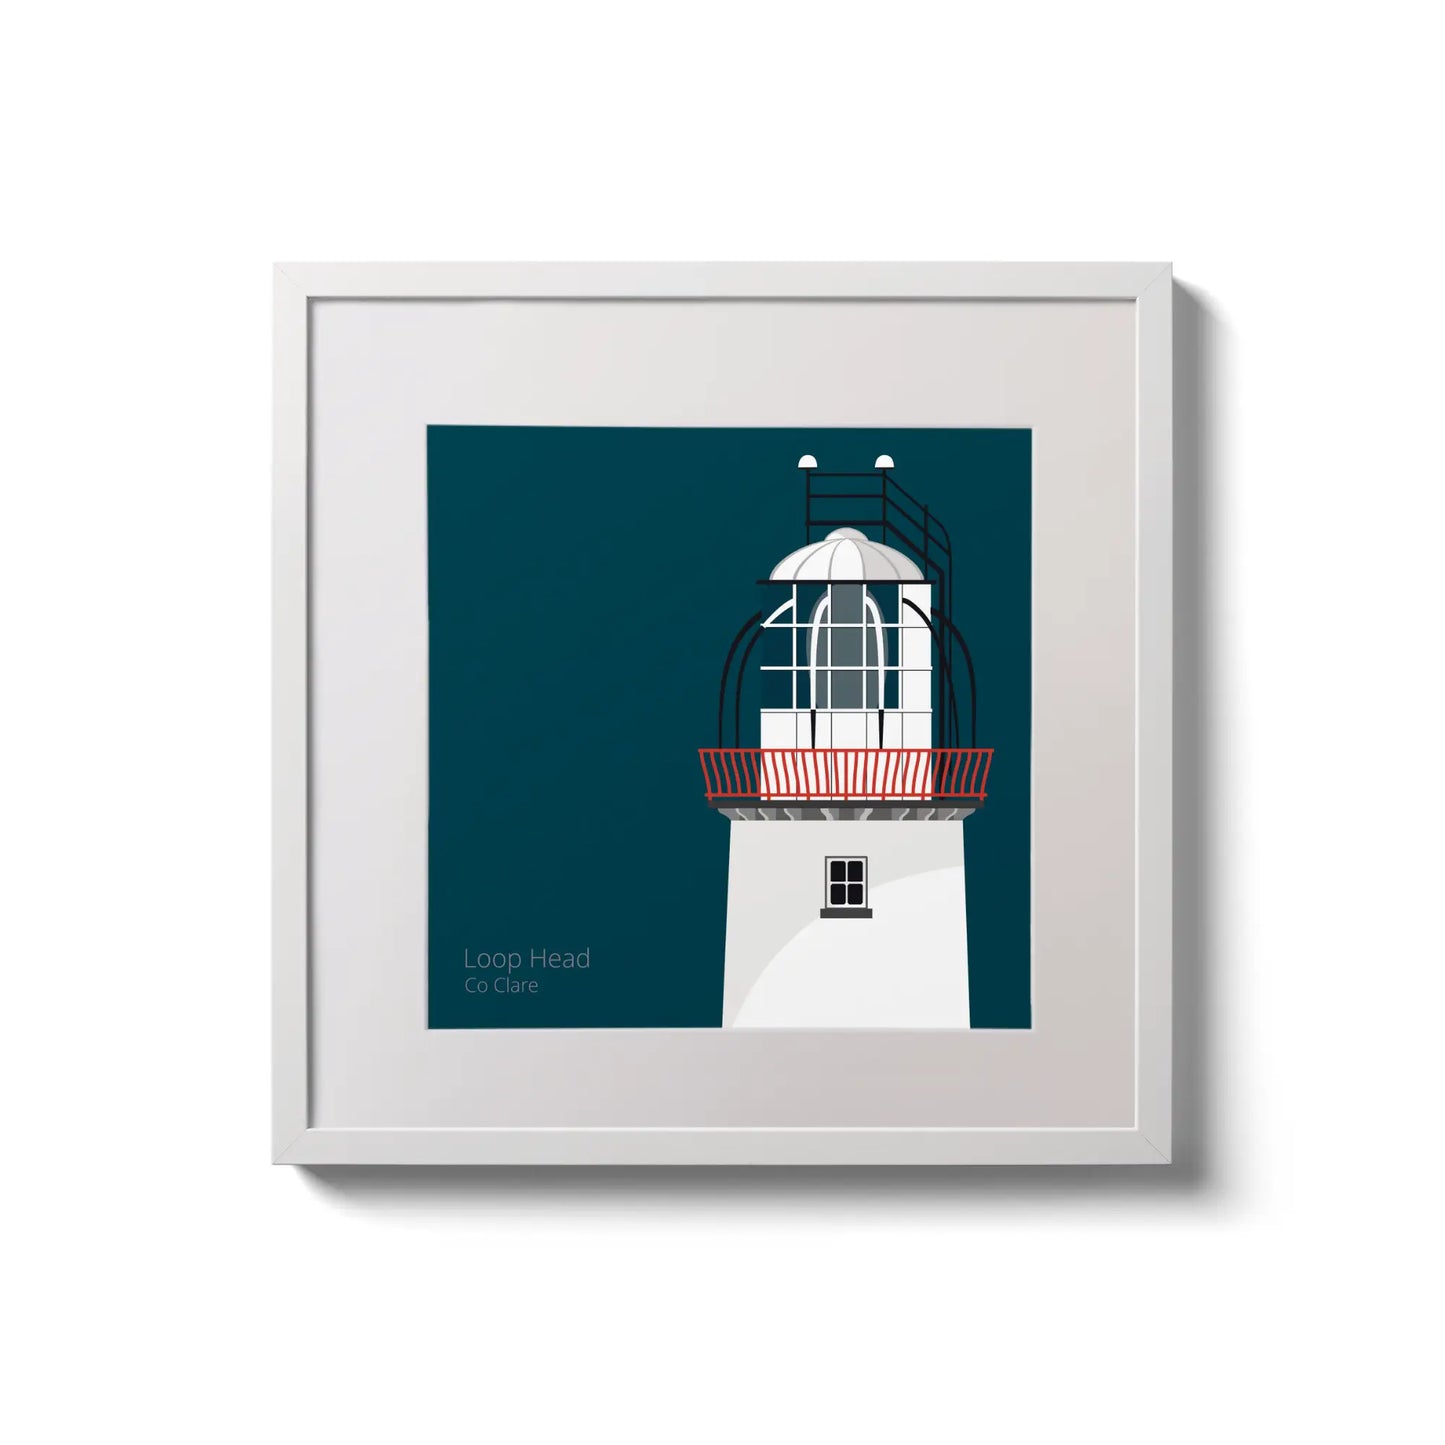 Illustration of Loop Head lighthouse on a midnight blue background,  in a white square frame measuring 20x20cm.